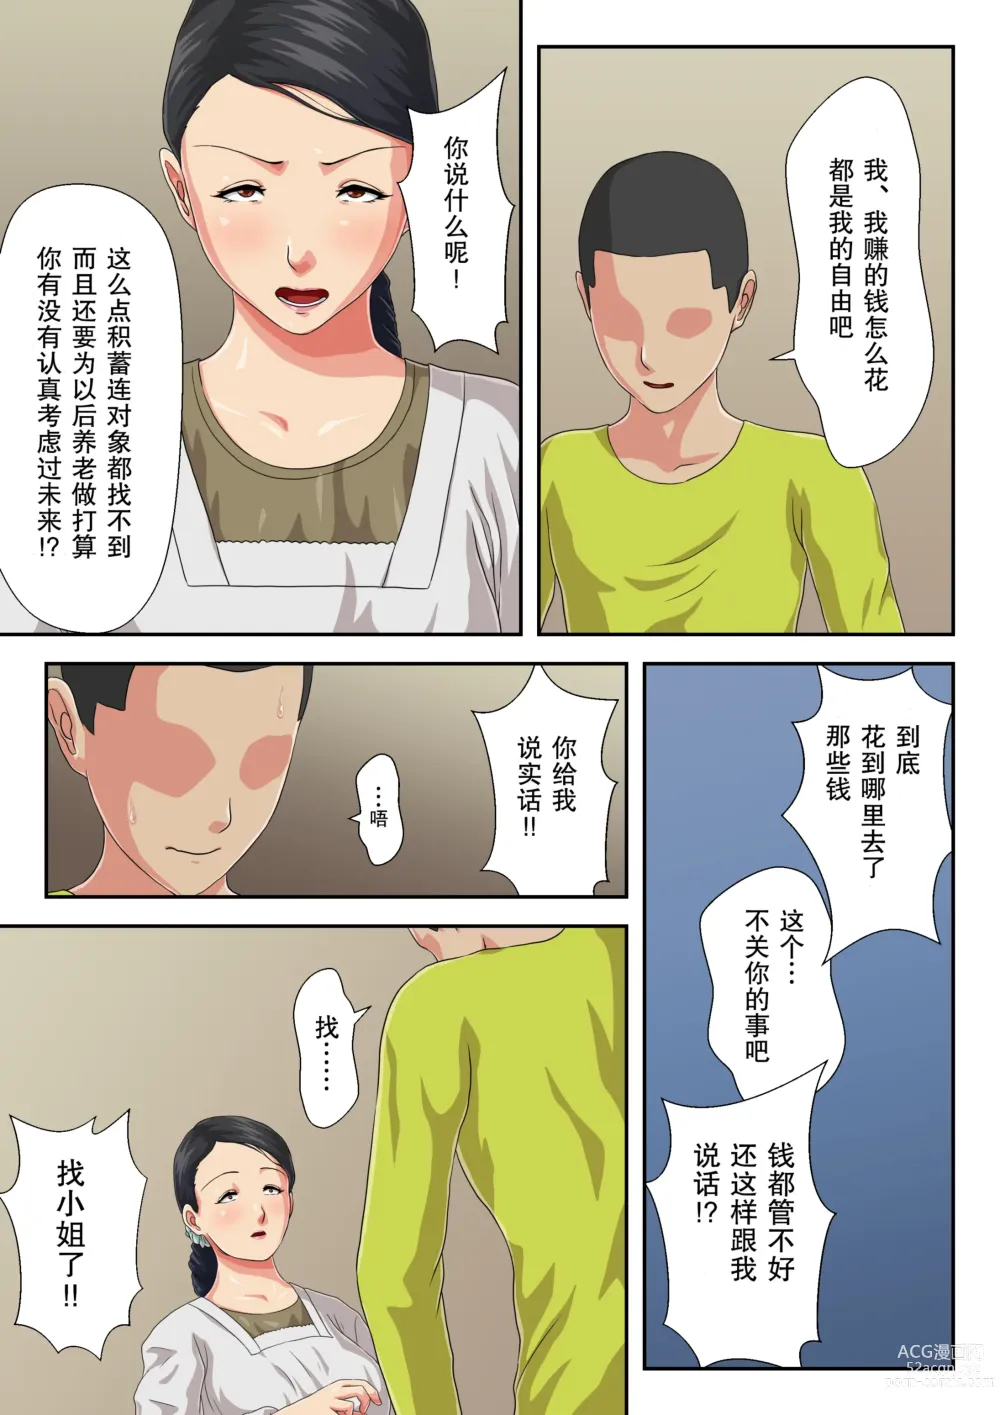 Page 4 of doujinshi 用妈妈发泄吧